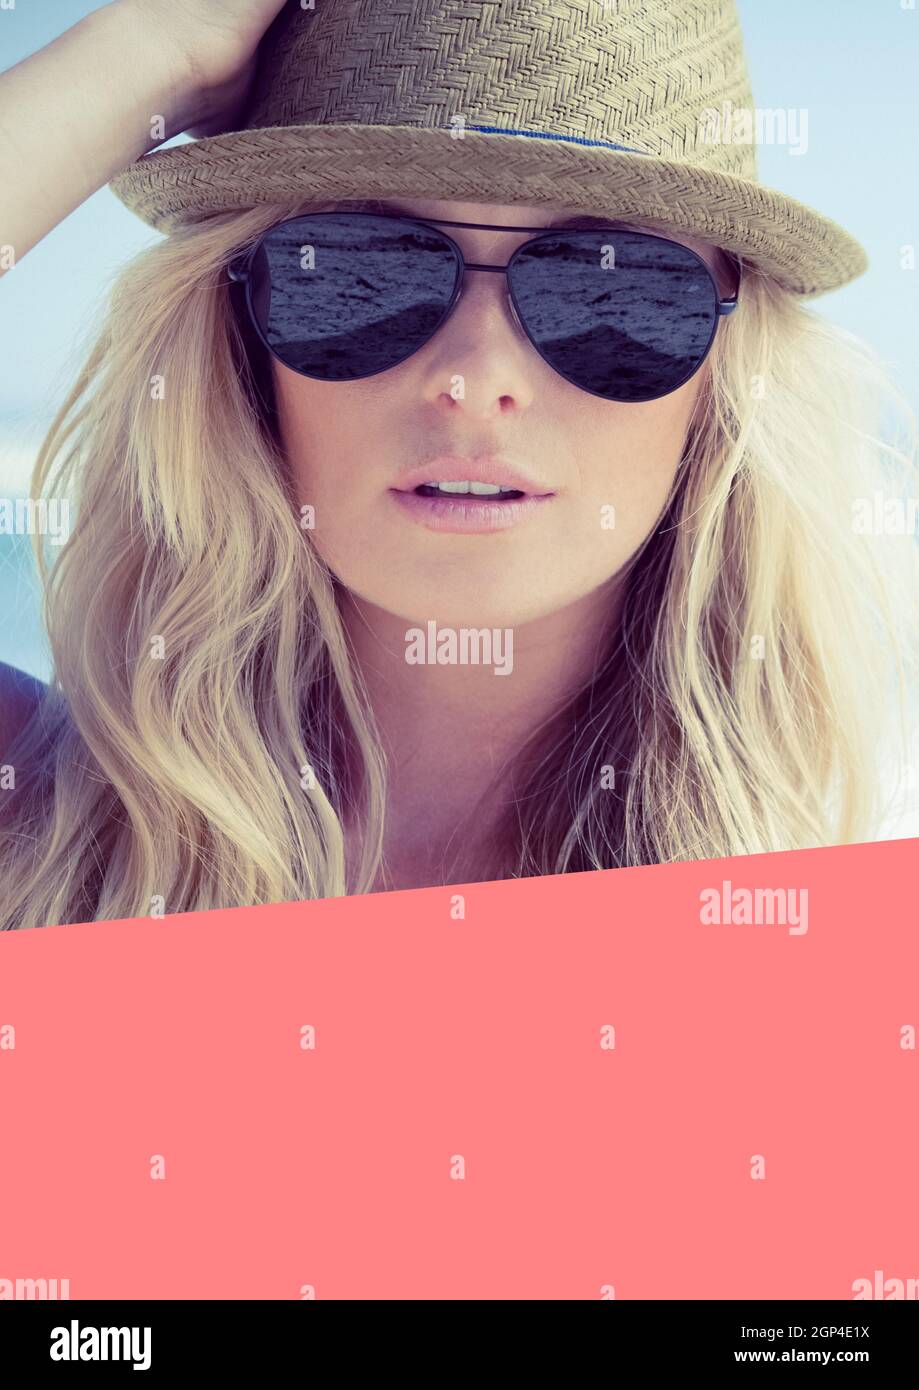 Composition of caucasian woman wearing hat and sunglasses on beach Stock Photo